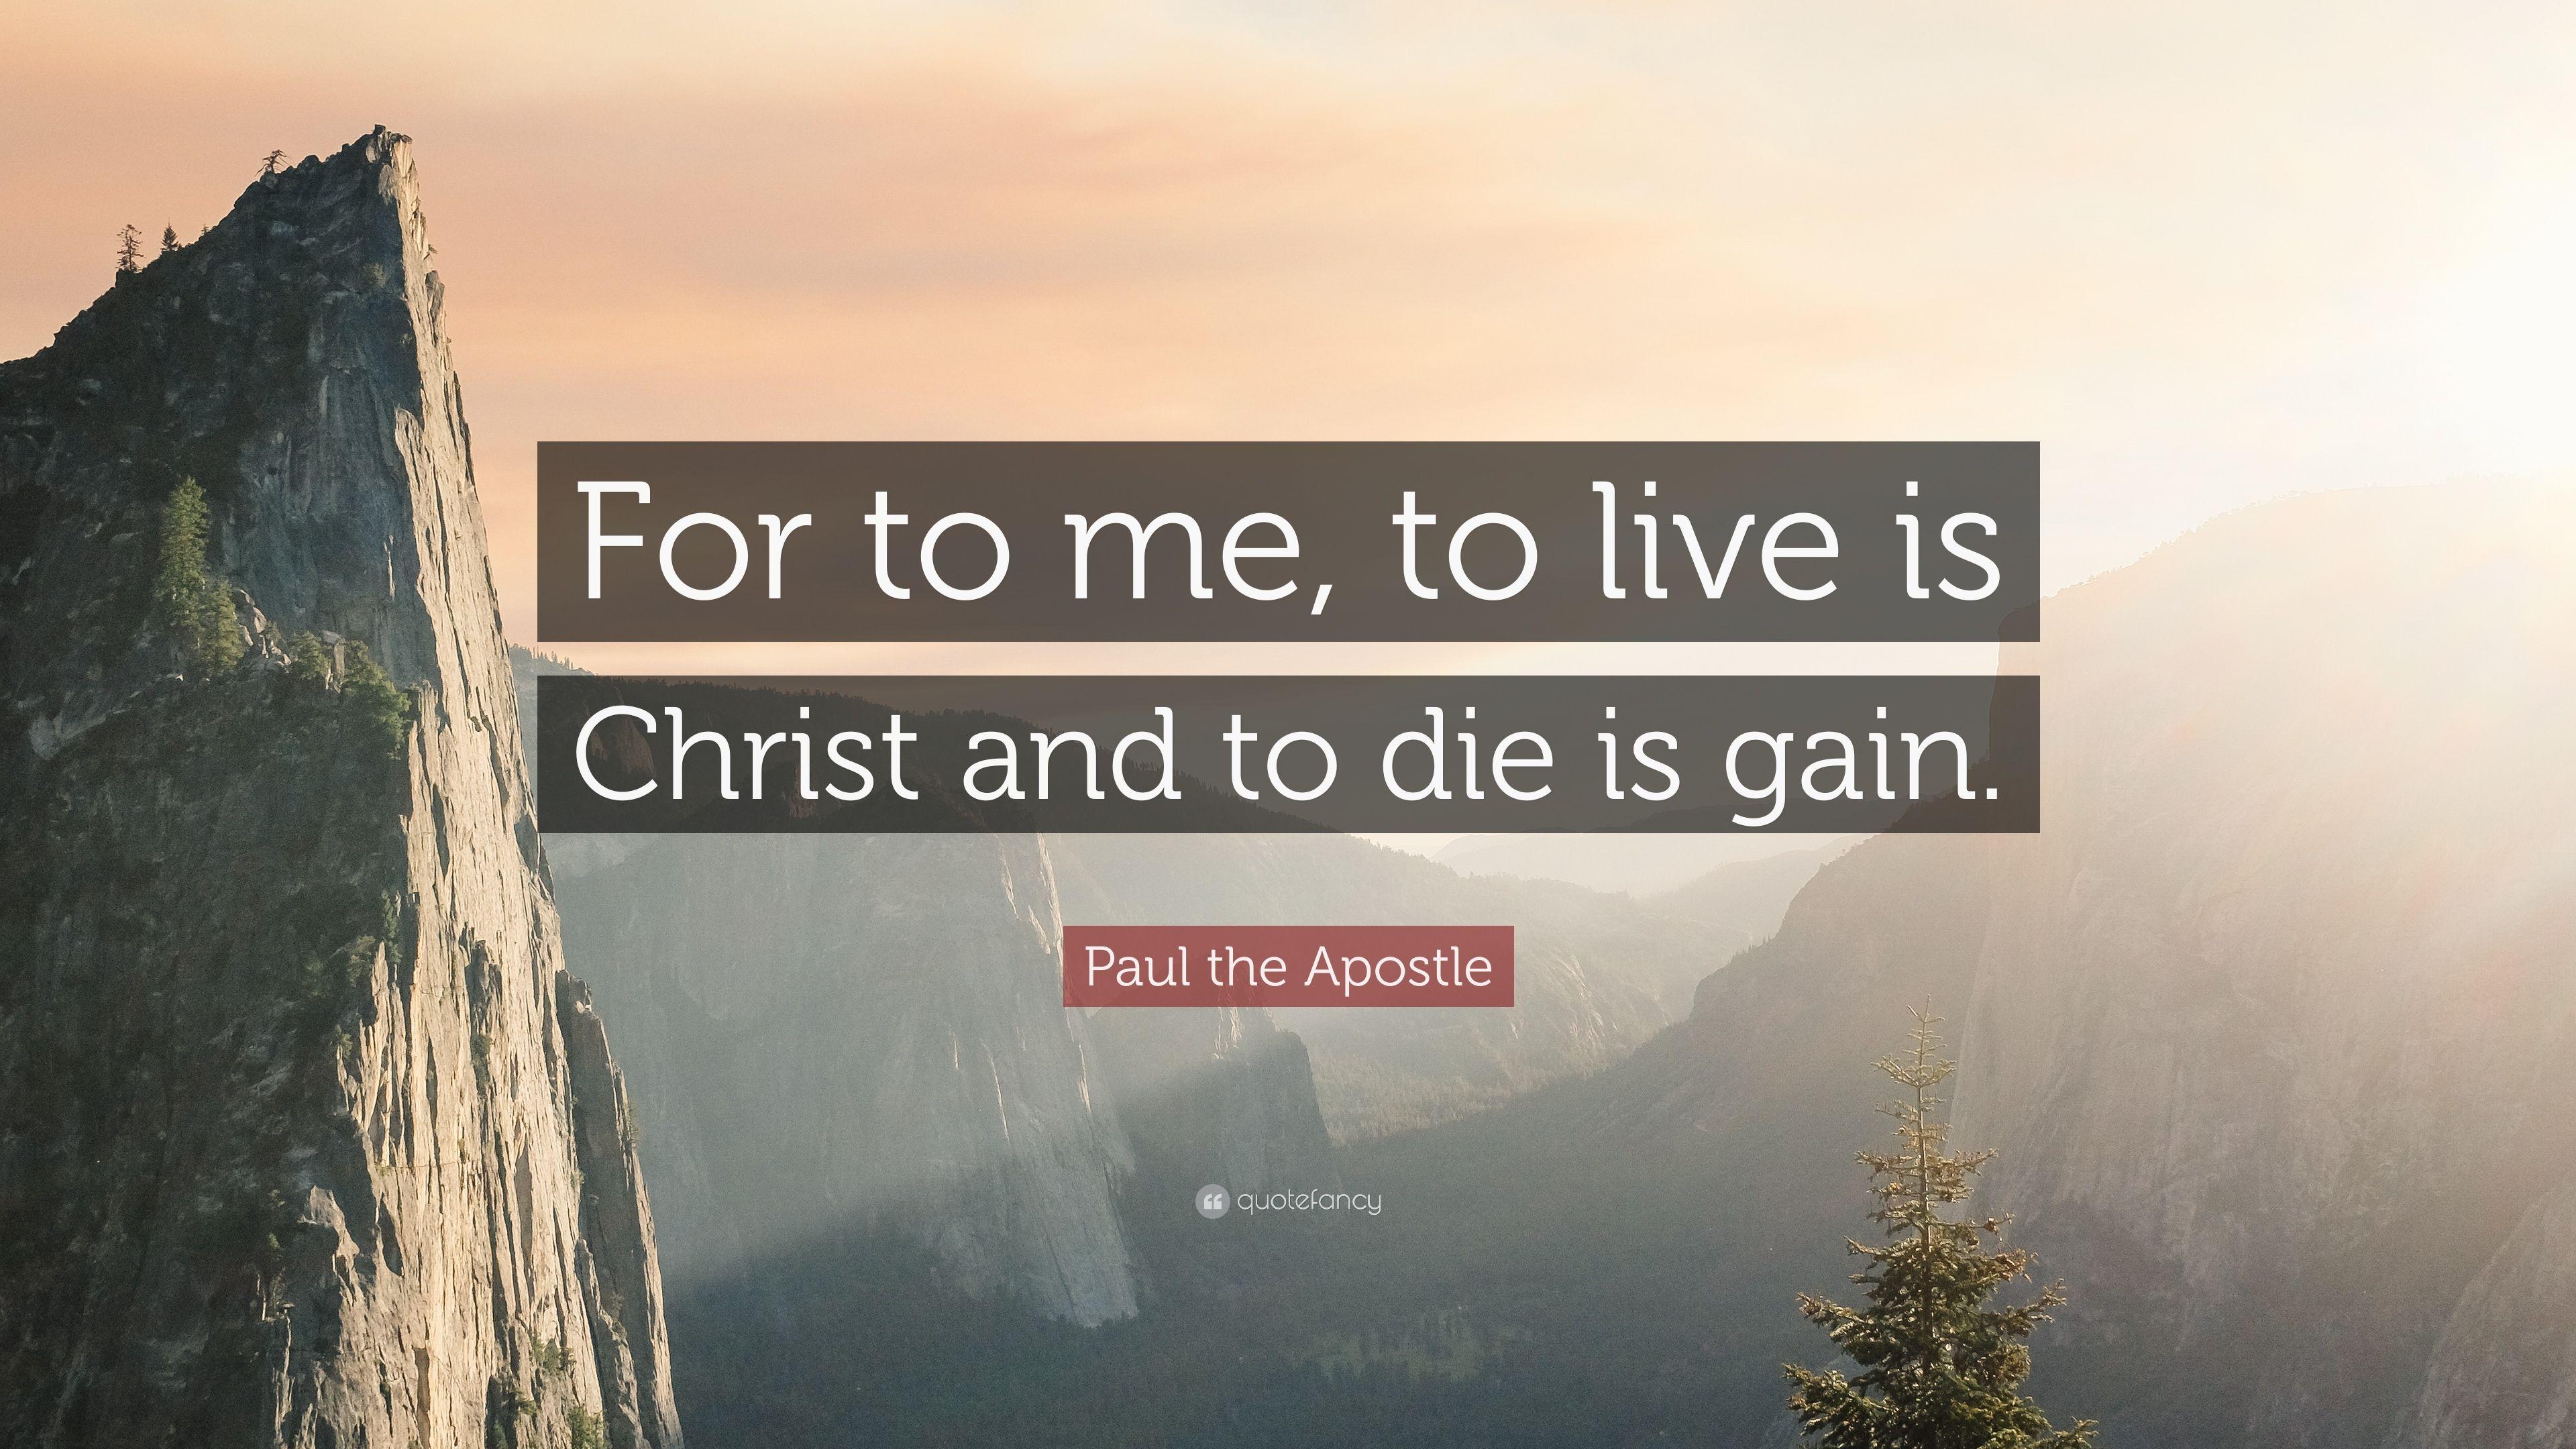 Paul the Apostle Quote: "For to me, to live is Christ and to die 